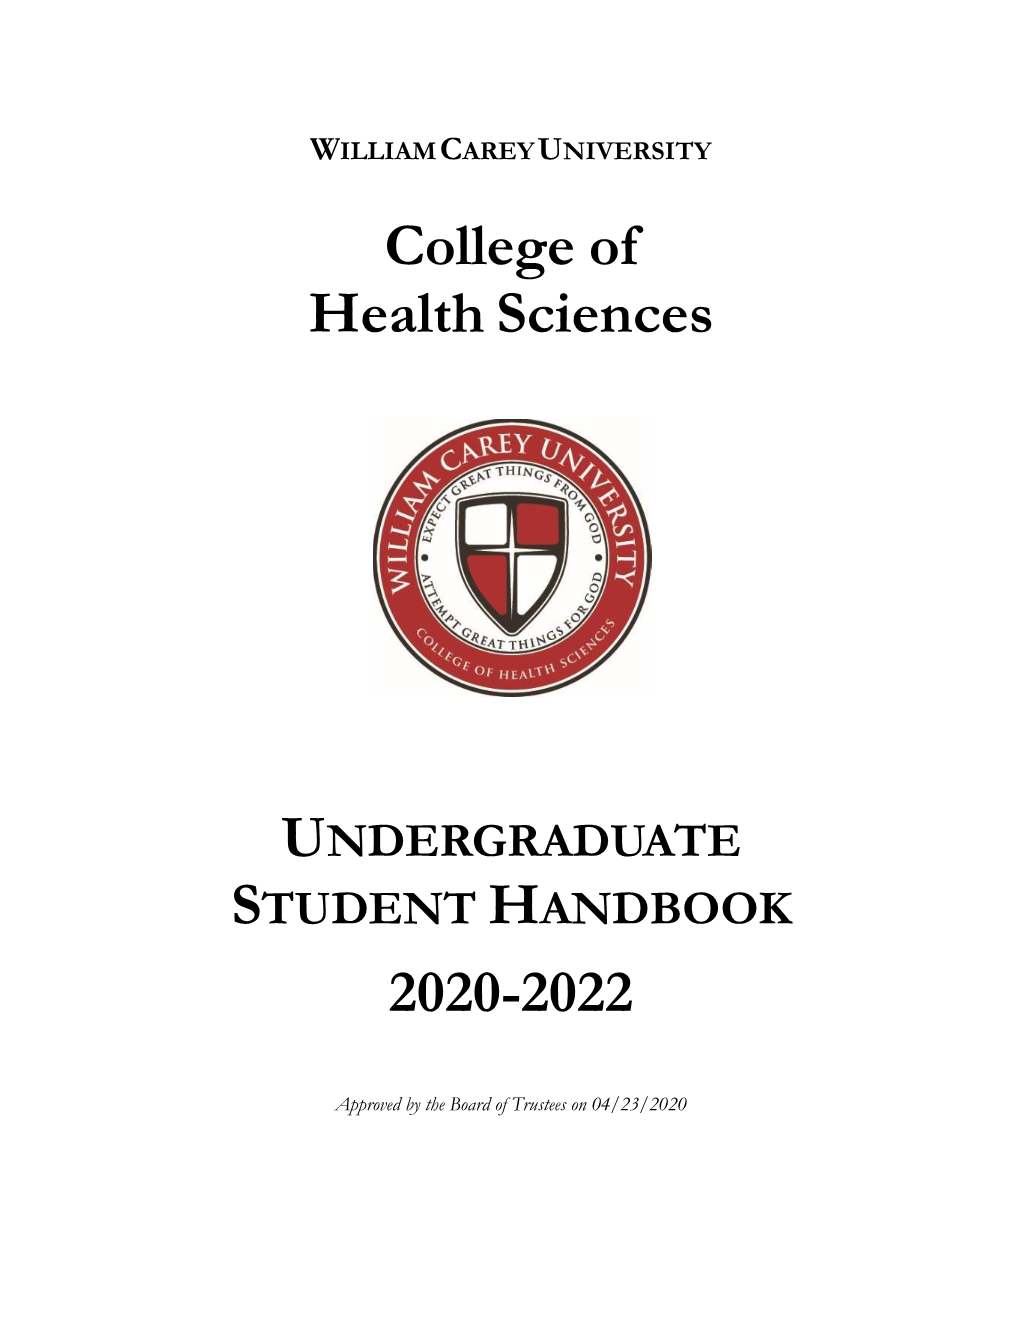 College of Health Sciences Undergraduate Student Handbook Is Intended to Address Informational Needs Which Are Unique to the Health Science Majors